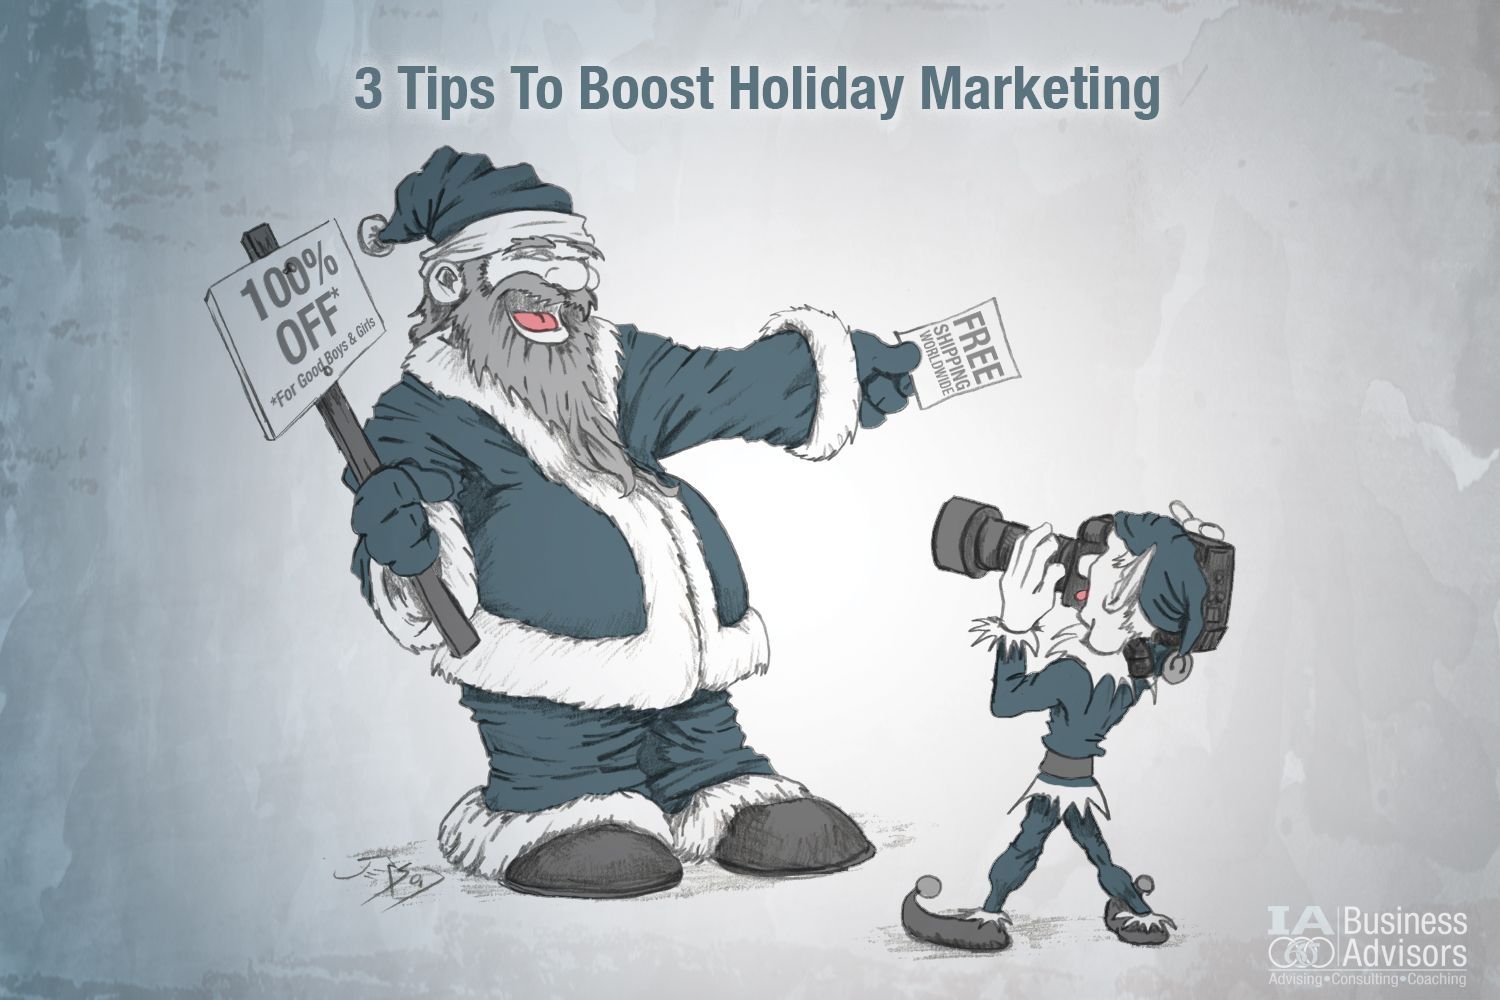 3 Tips to Boost Holiday Marketing